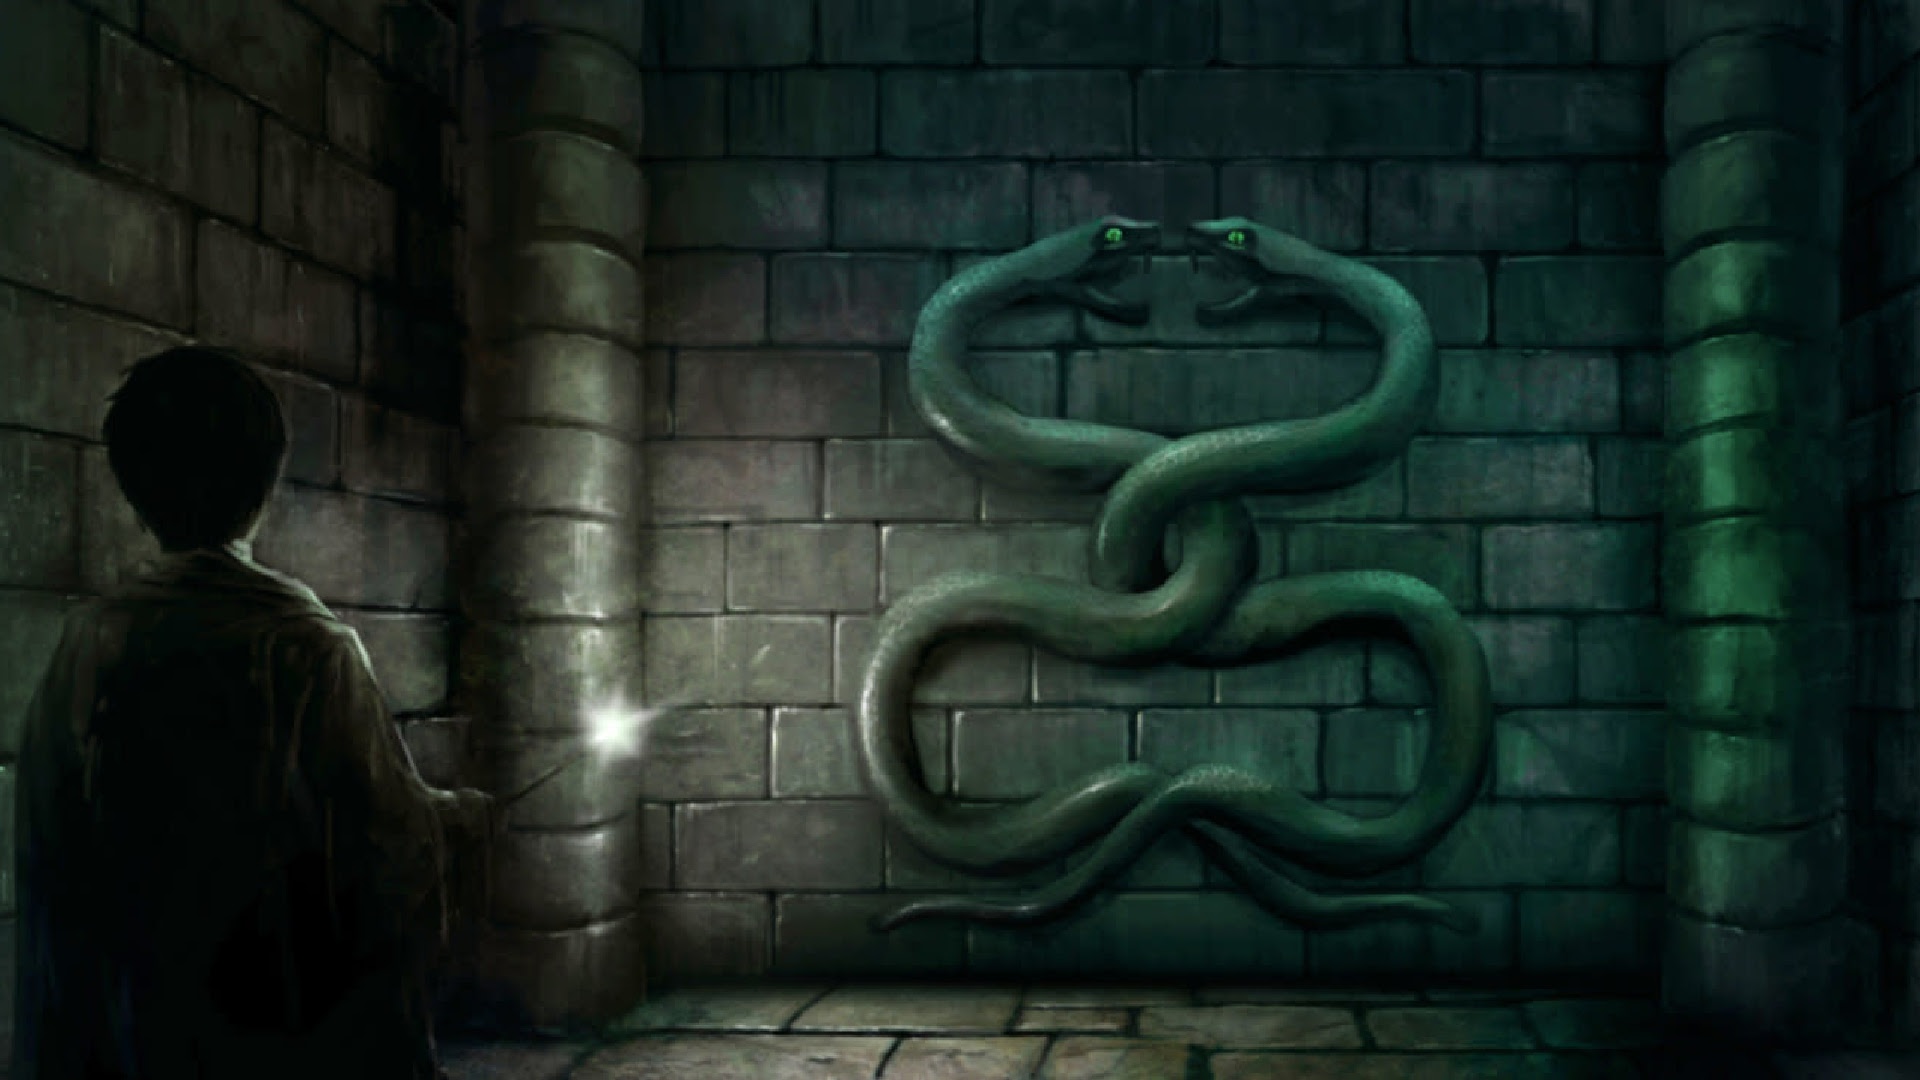 Harry Potter and the Chamber of Secrets for apple instal